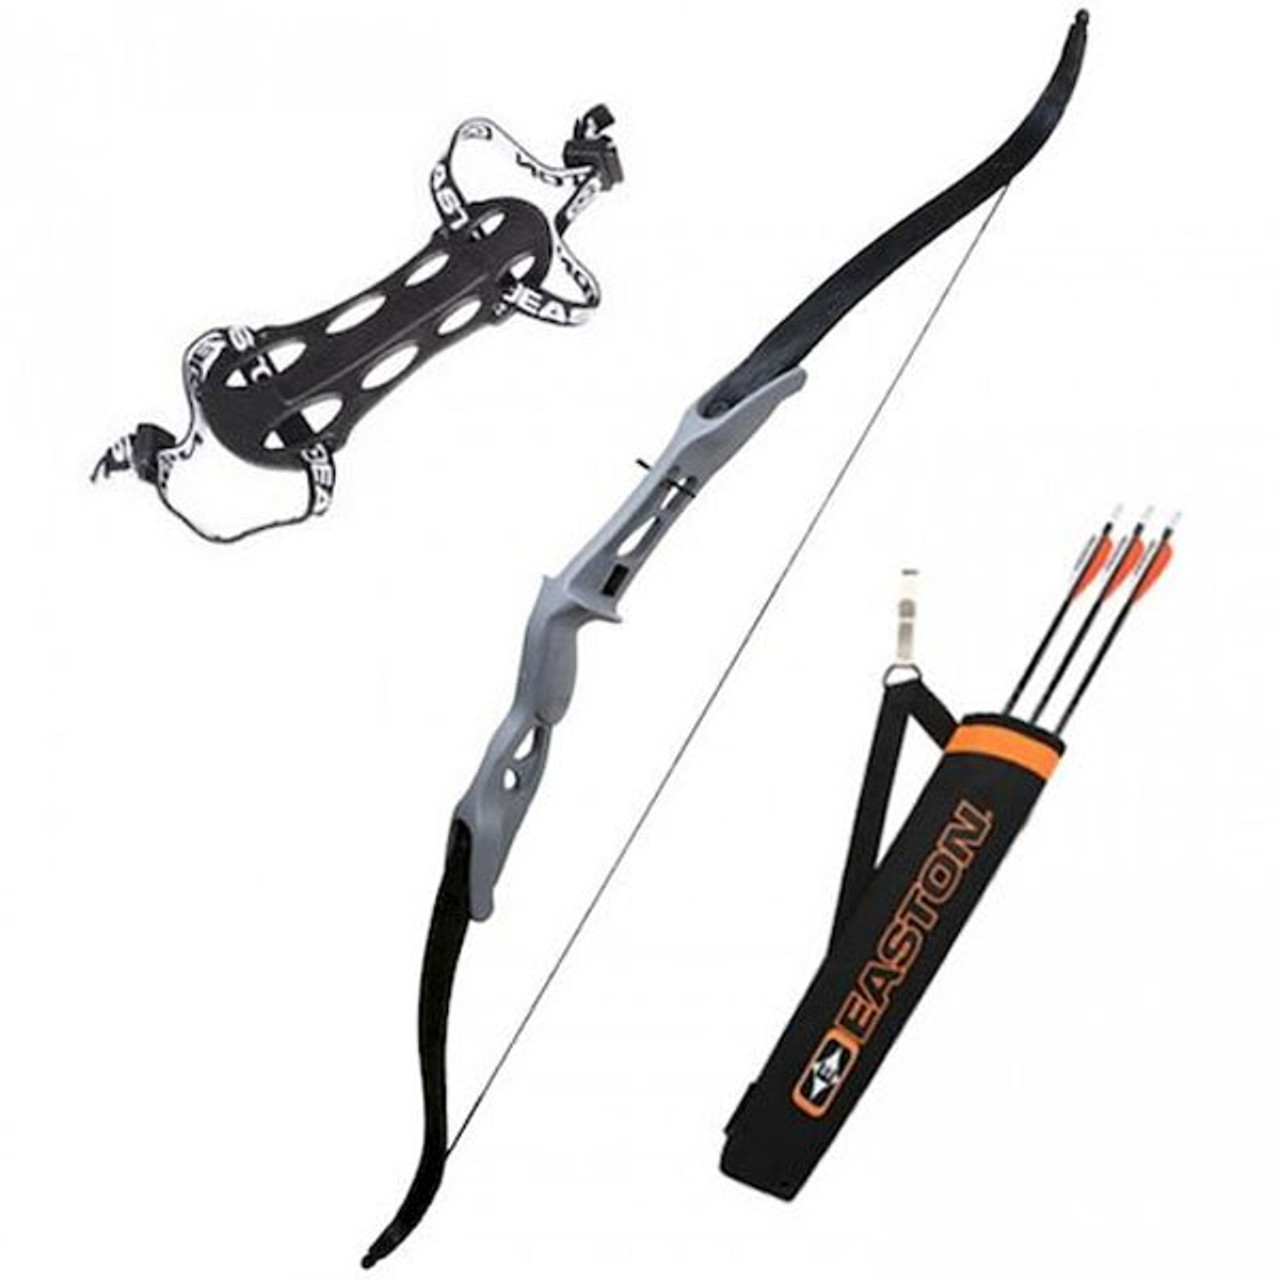 Easton Youth Recurve Bow Arch Kit Blk arrows  Black Arrows and Quiver